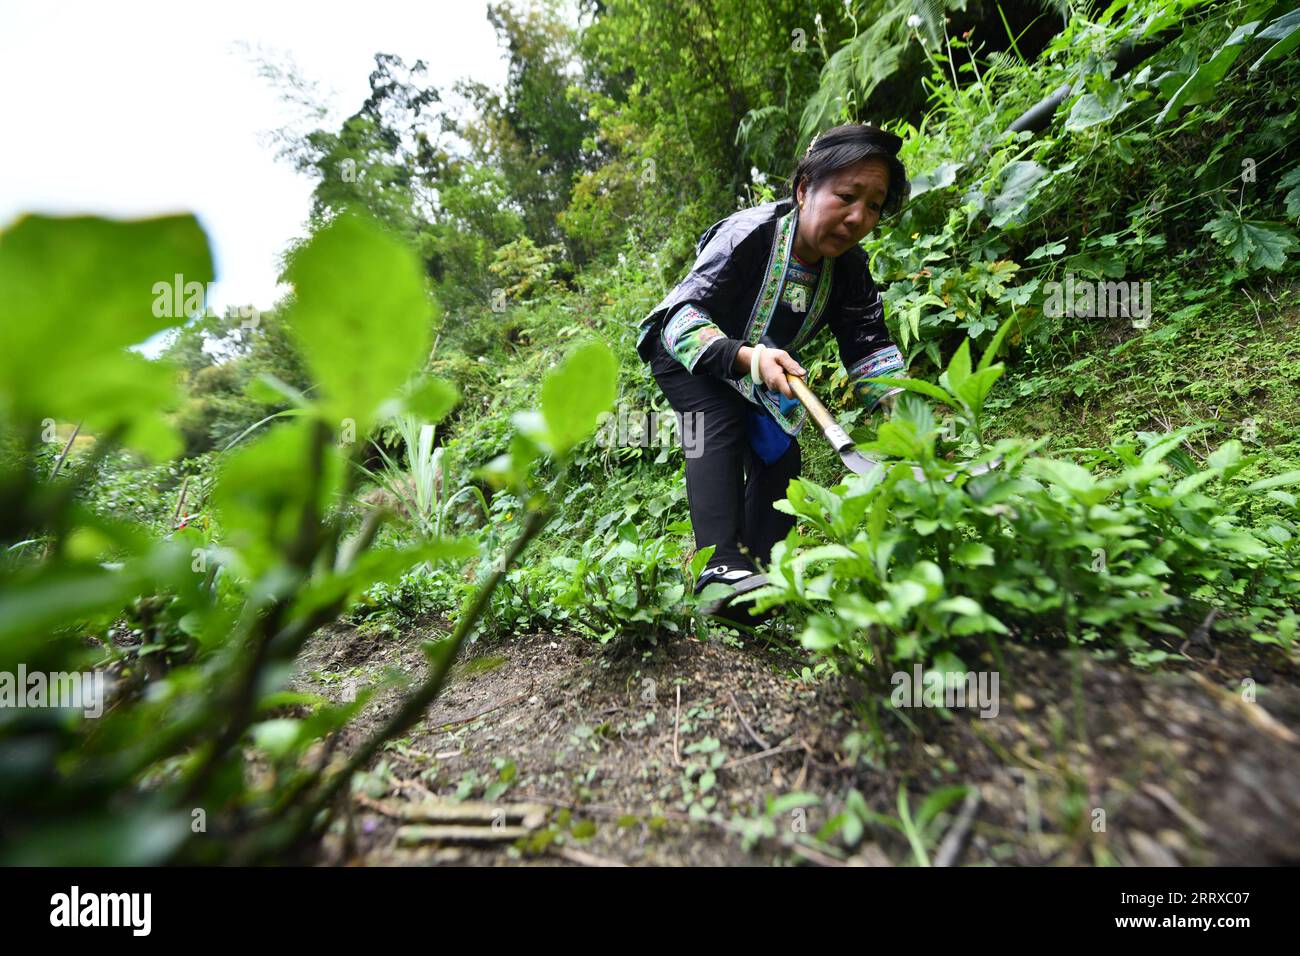 230903 -- RONGSHUI, Sept. 3, 2023 -- Liang Zuying harvests the woad on a mountain in Wuying Village on the border between south China s Guangxi Zhuang Autonomous Region and southwest China s Guizhou Province, on Aug. 29, 2023. Wuying Village is a Miao ethnic group hamlet that nestles snugly in the towering mountains stretching across the border between Guangxi and Guizhou. Liang Bu , named for its glistening appearance, is a kind of traditional hand-made cloth of Miao ethnic group. Women of Miao ethnic group in Wuying plant woad in spring and harvest it in fall. They soak woad in water for day Stock Photo